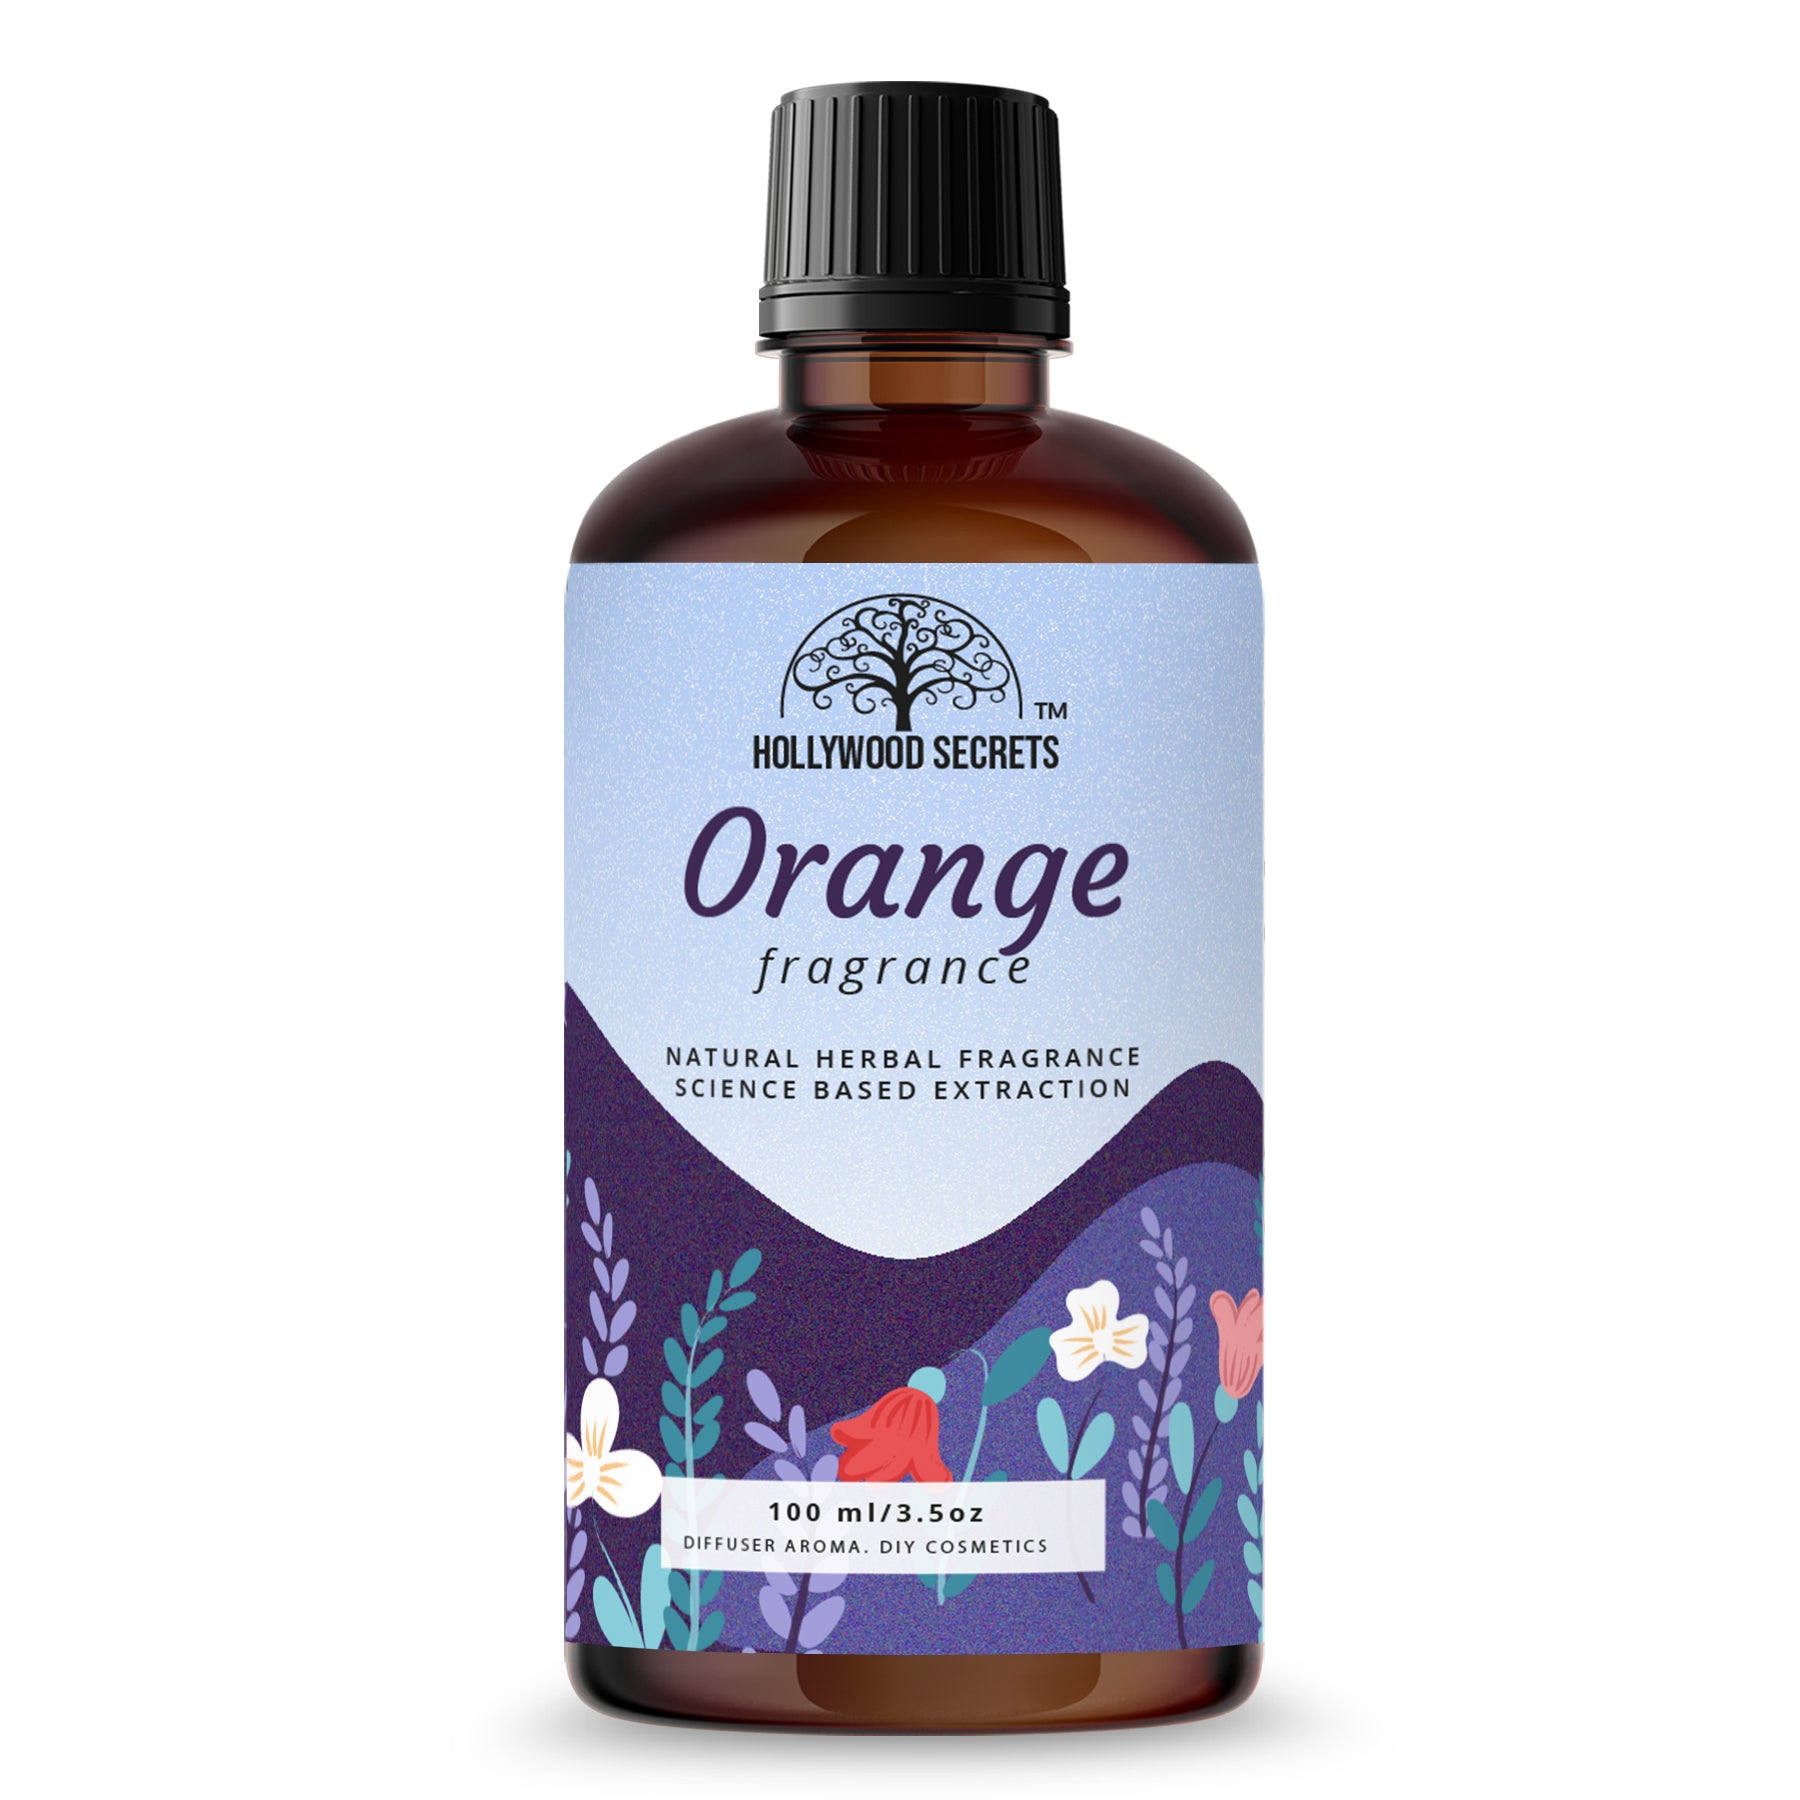 Pure Orange Fragrance Liquid For Diffuser And Cosmetic 100ml Hollywood Secrets